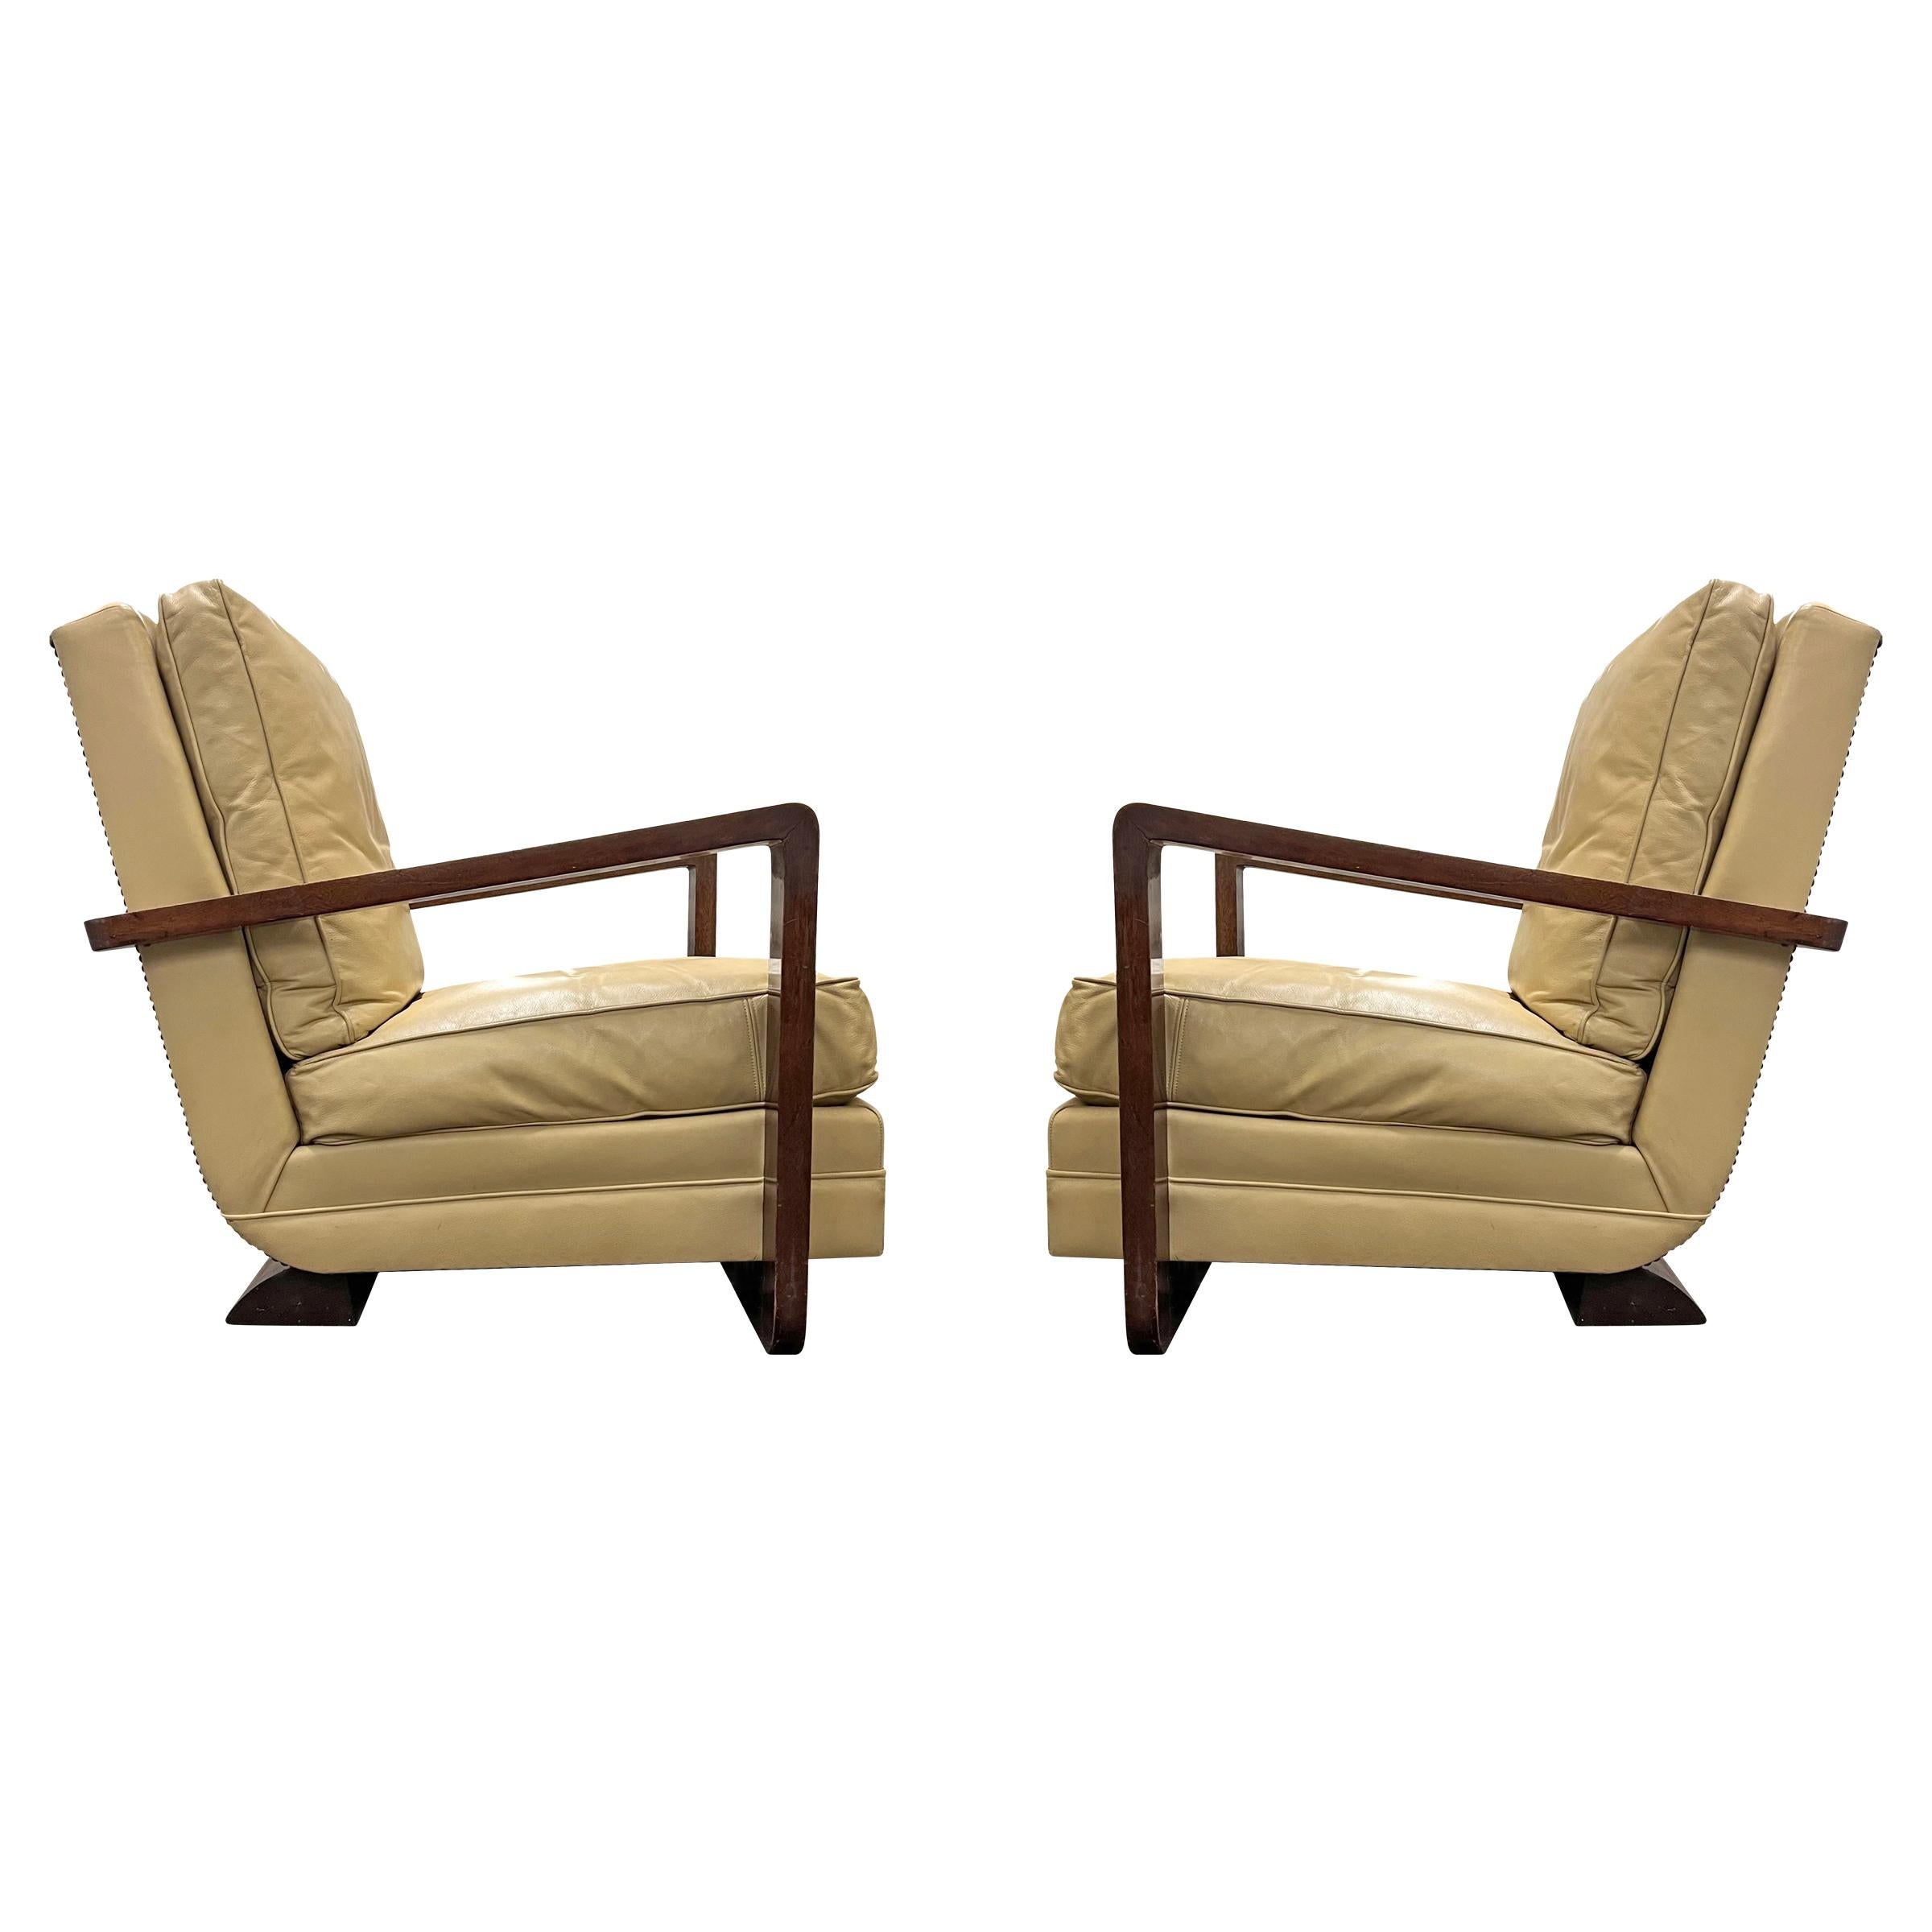 Pair of French Art Deco Club Chairs In Good Condition For Sale In Chicago, IL